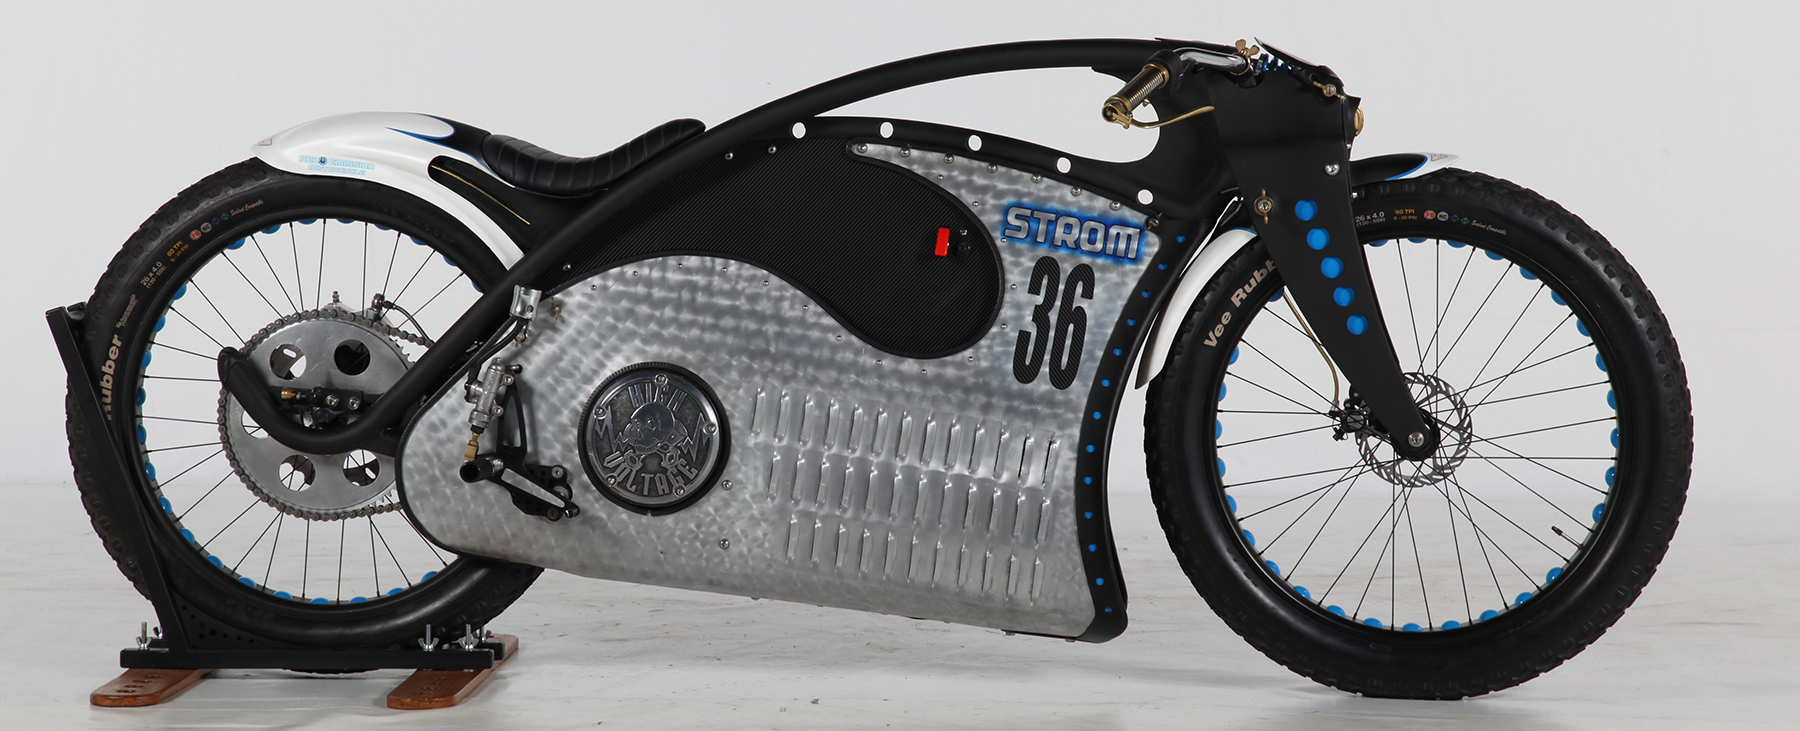 Strom36 electric motorcycle